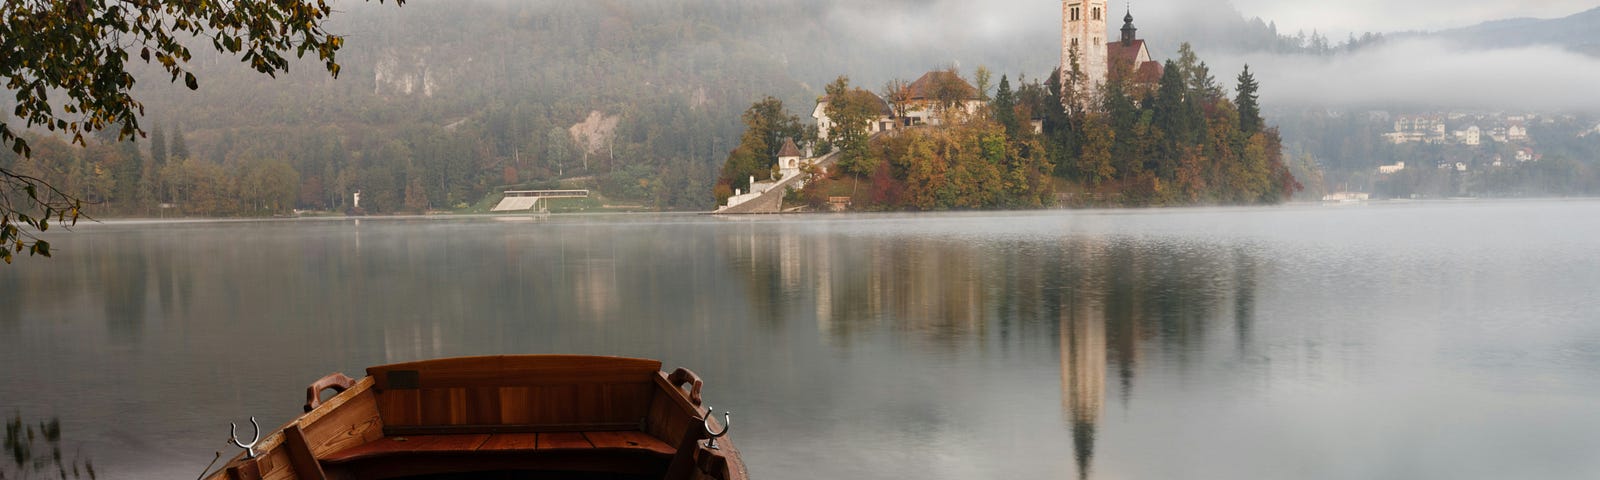 A photo of a boat near the end of a pier on a lake. An island with a castle is visible across the body of water.